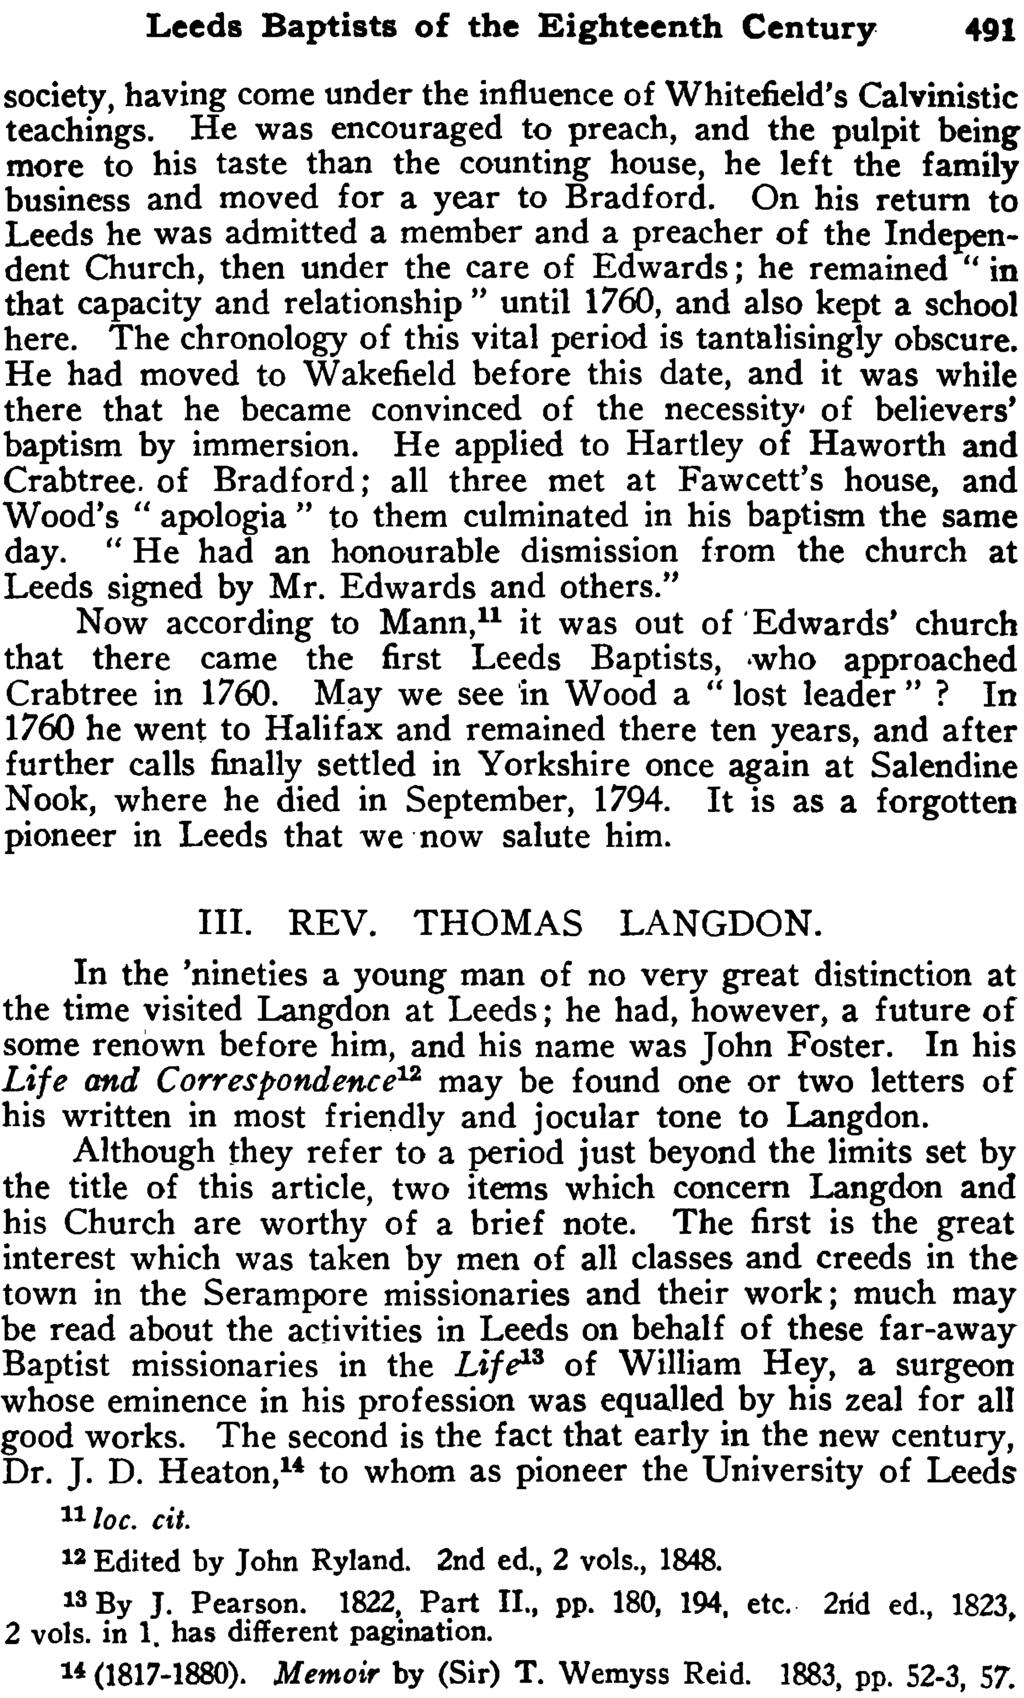 Leeds Baptists of the Eighteenth Century 491 society, having come under the influence of Whitefield's Calvinistic teachings.